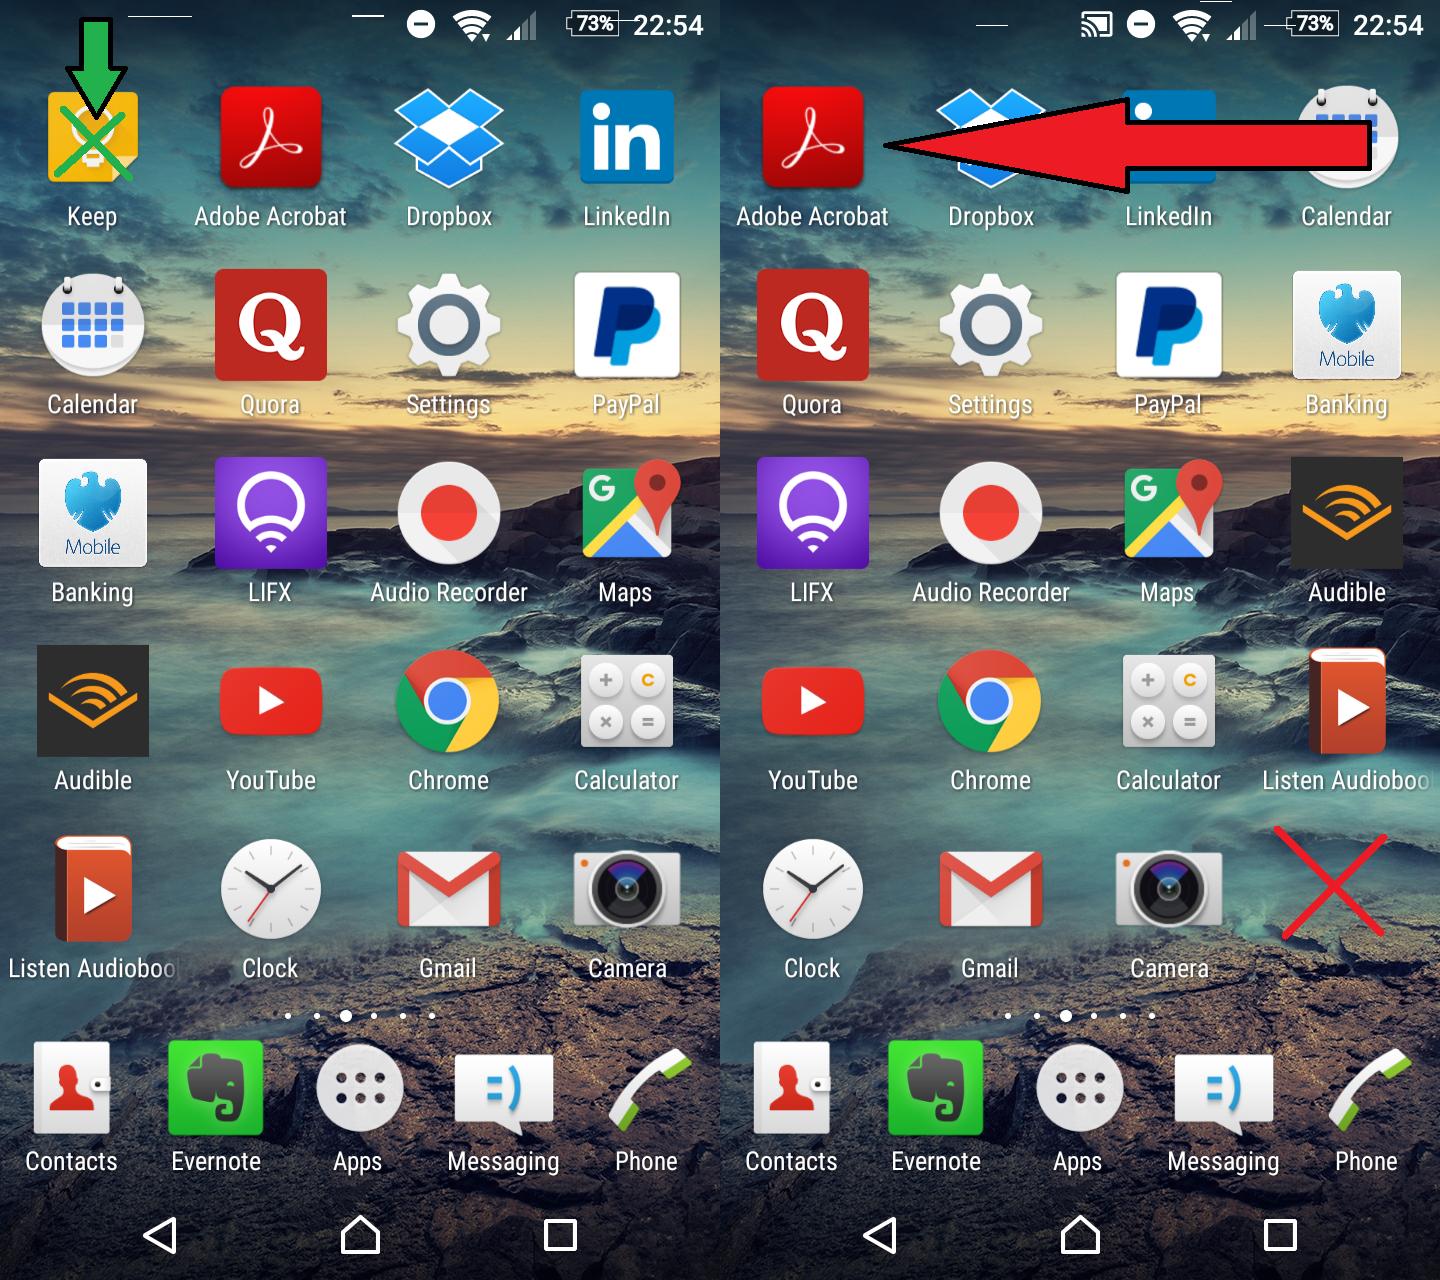 generate icon for android app